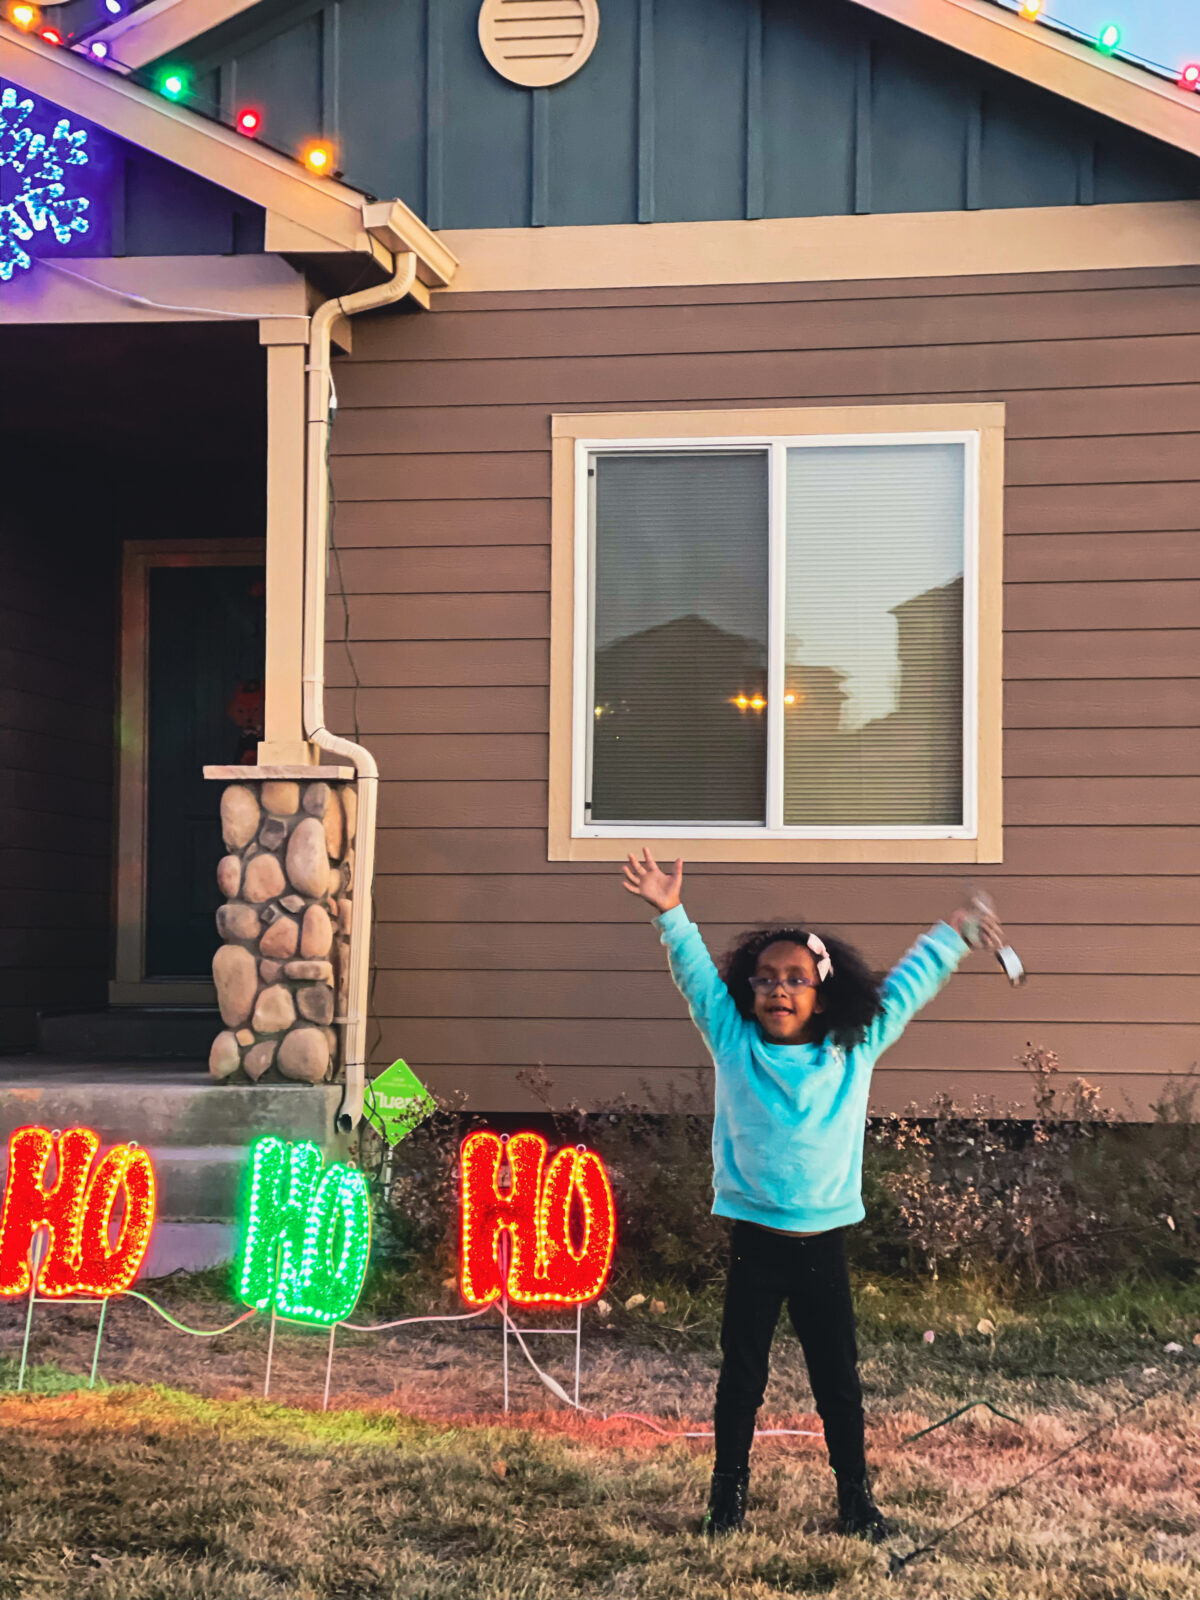 Little girl stands out front of her house, arms raised next to Christmas lights.